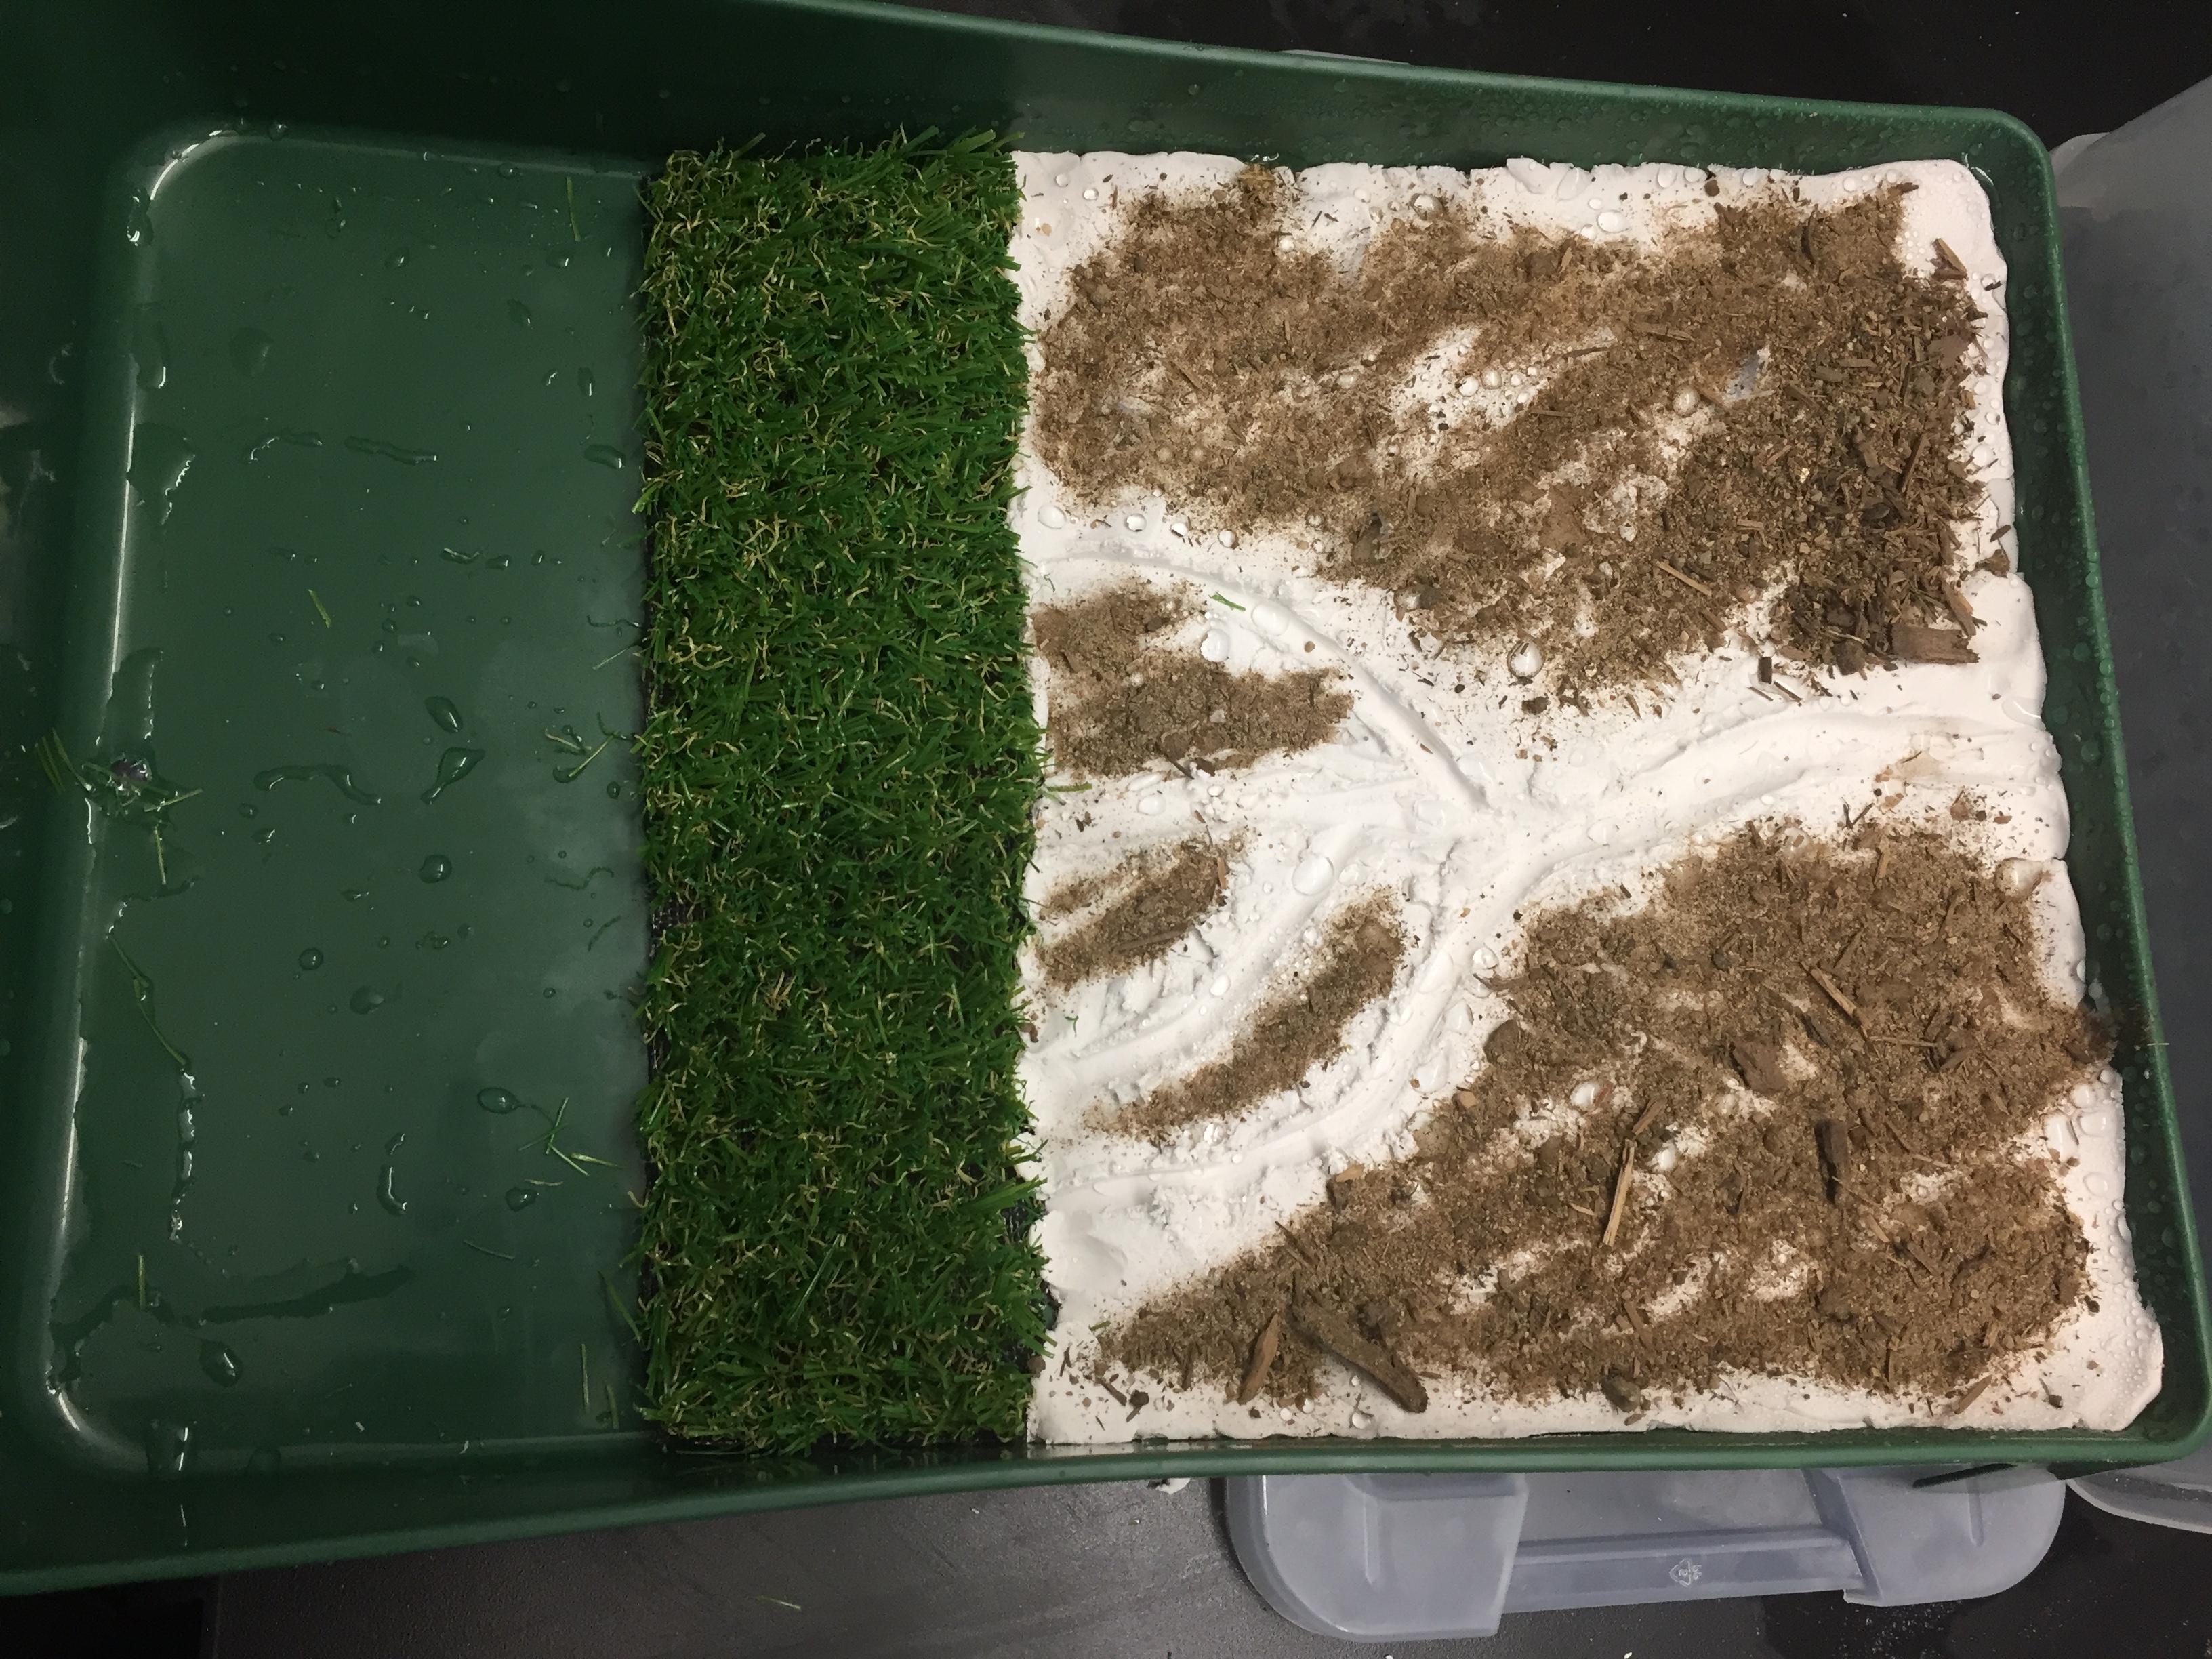 A photo showing the addition of soil to the model